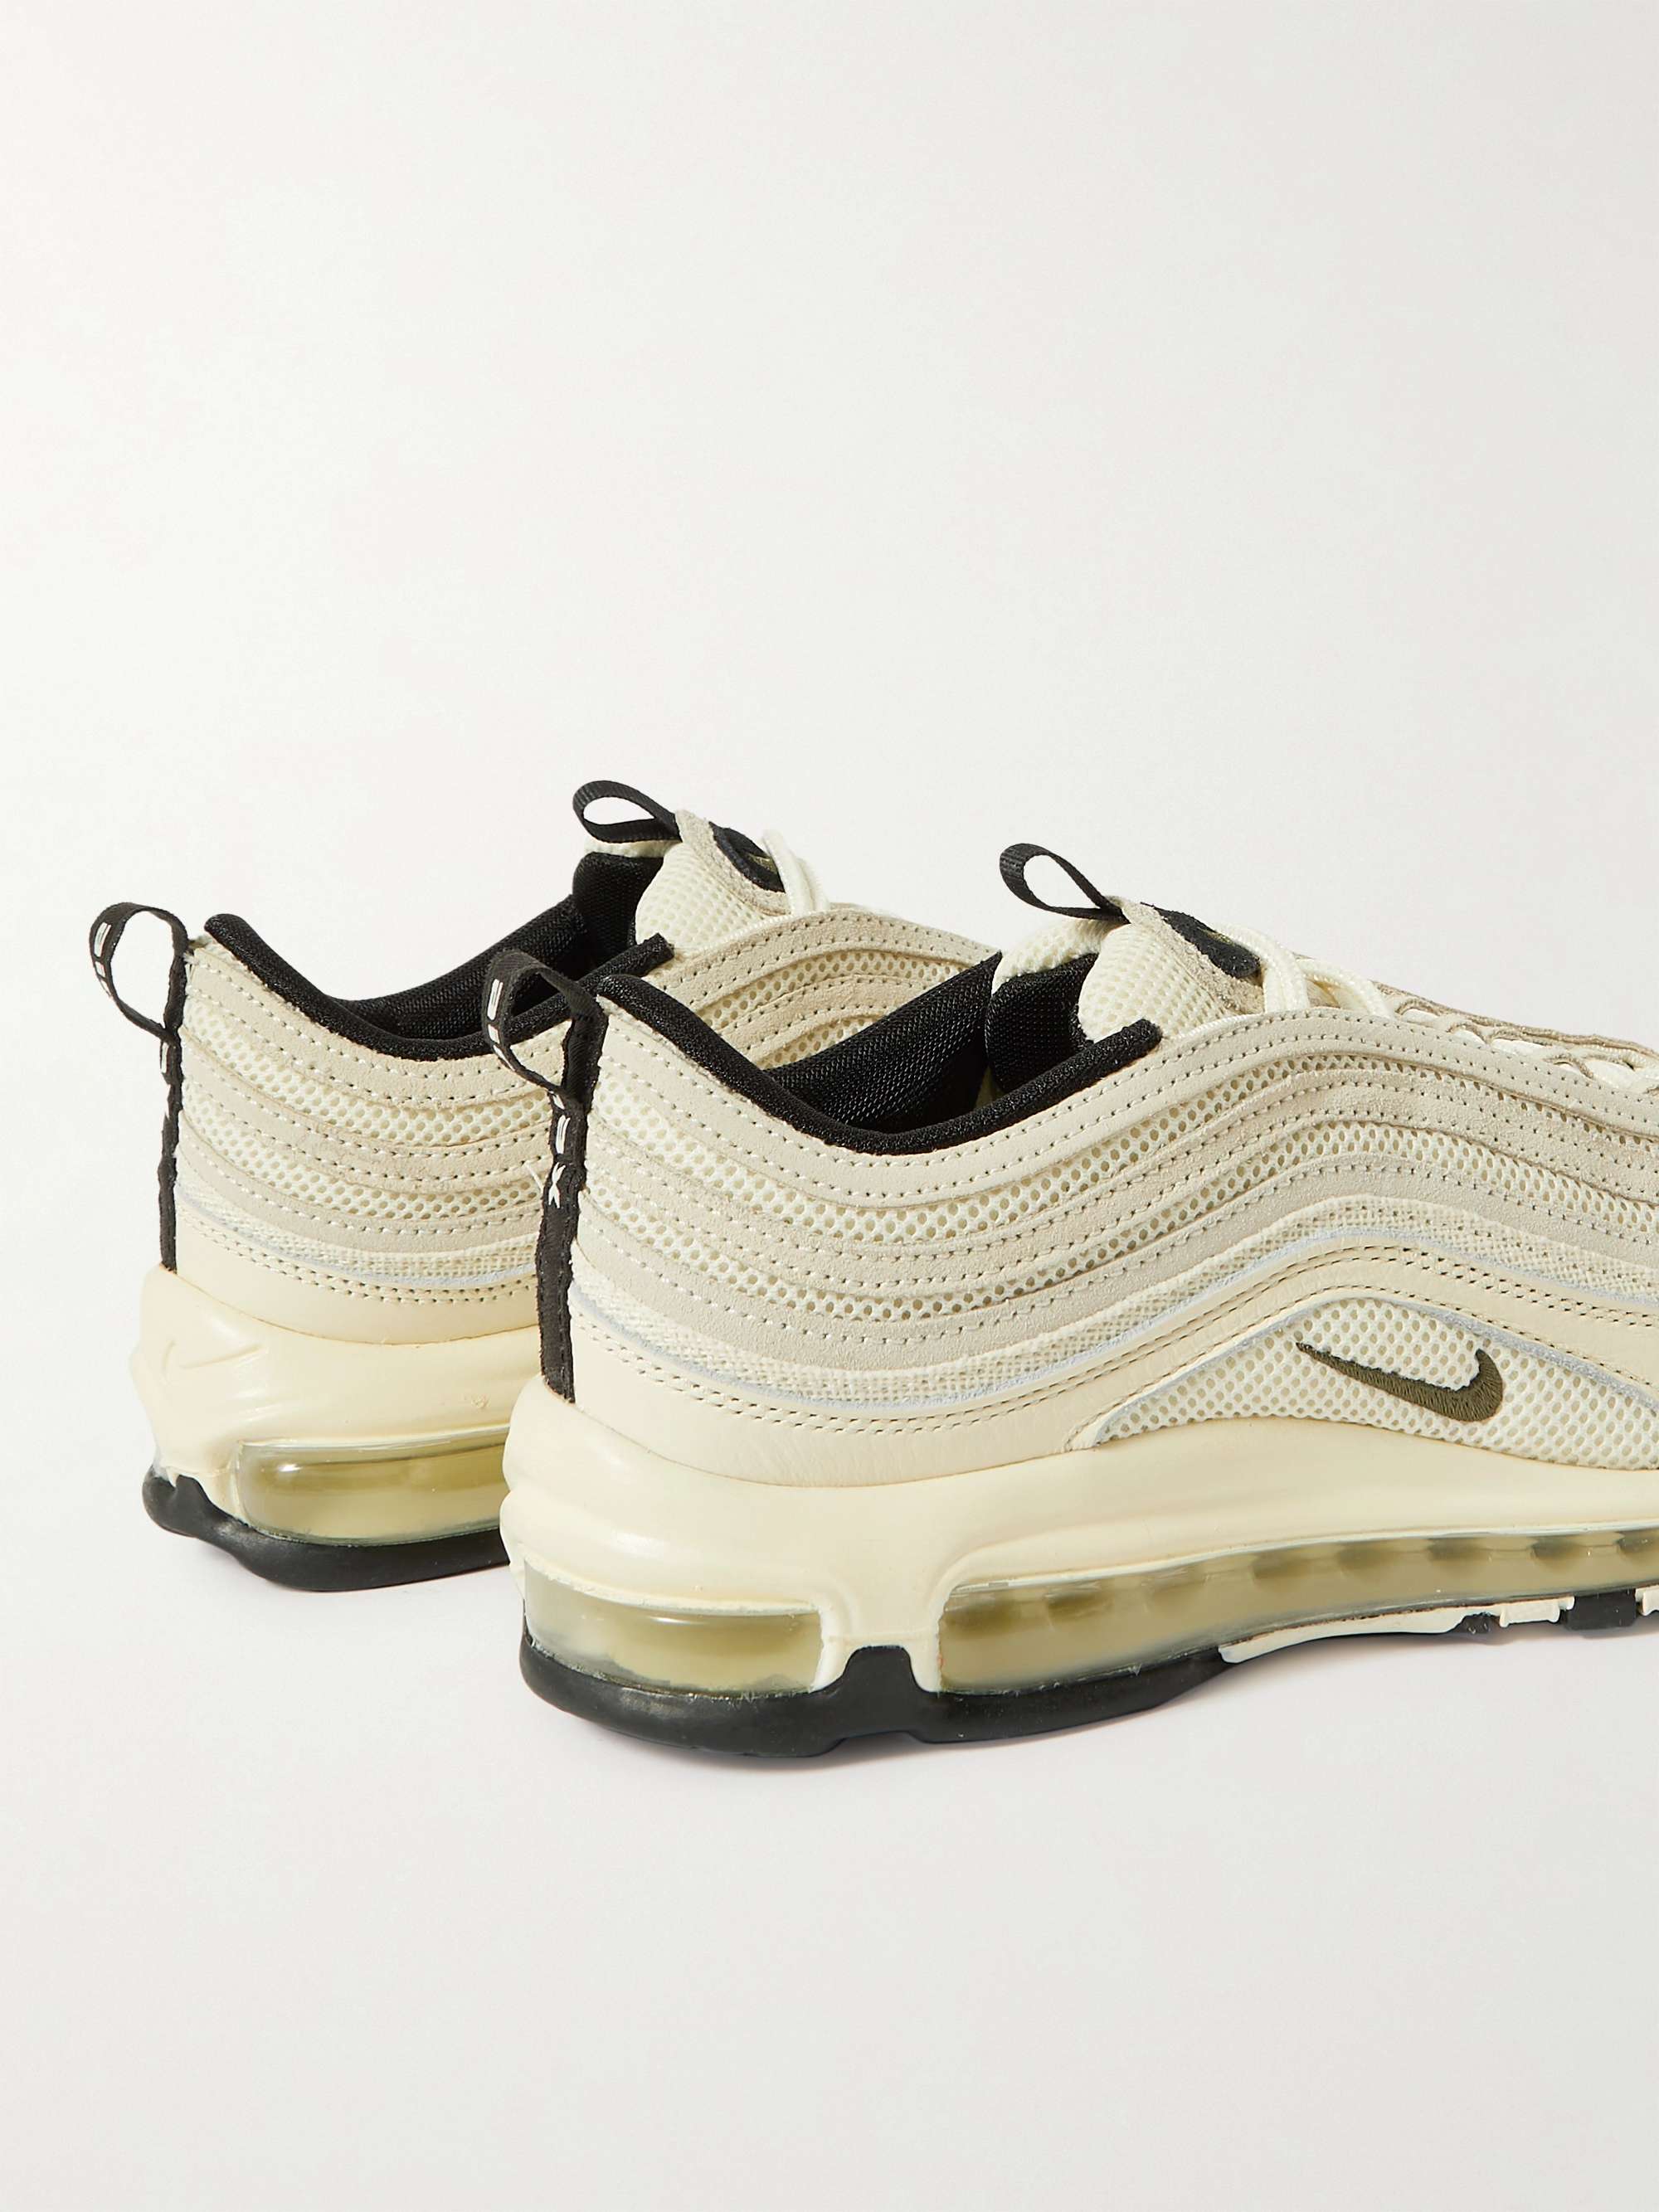 NIKE Air Max 97 Leather, Suede and Mesh Sneakers